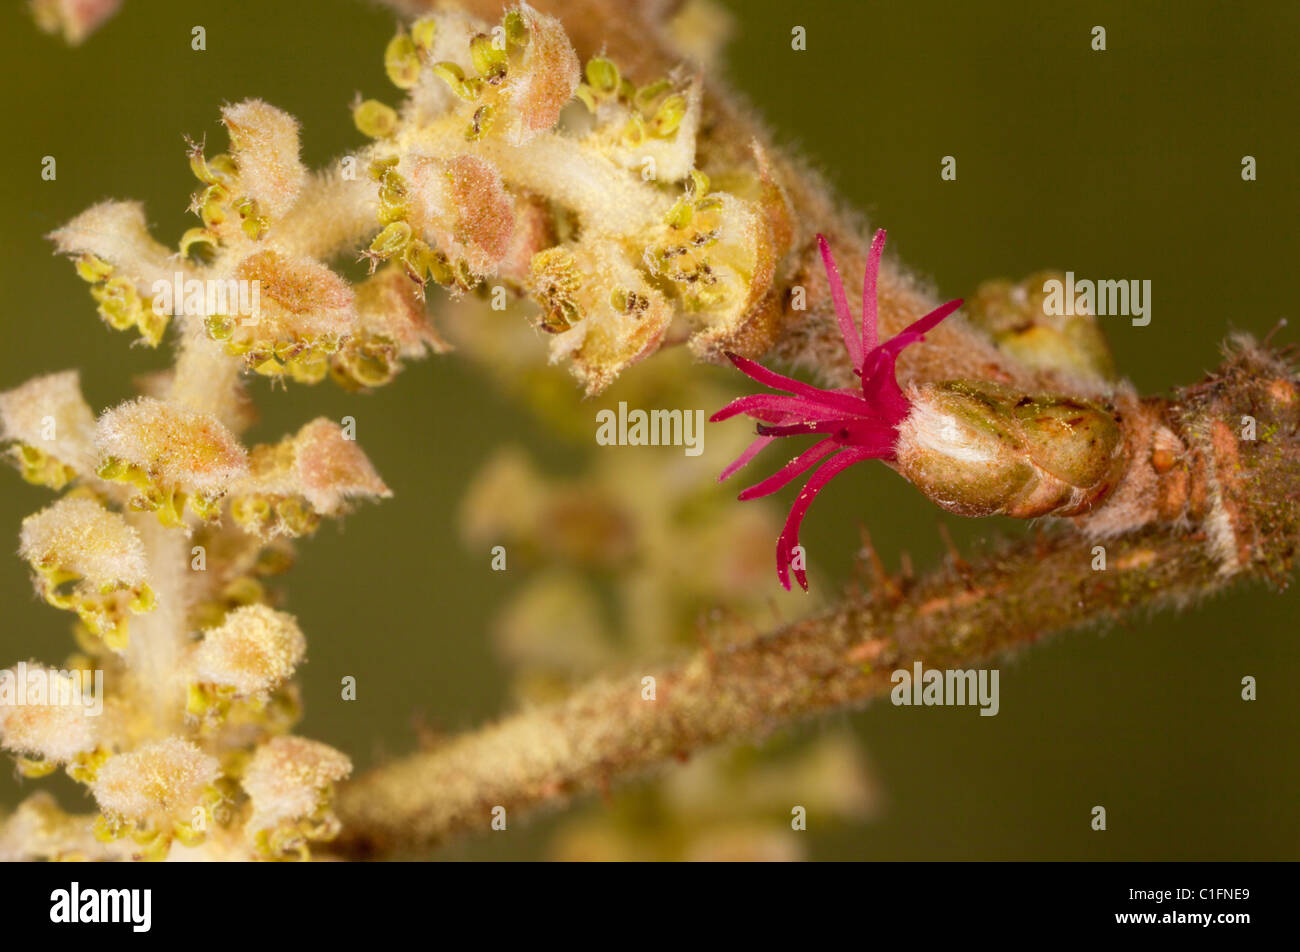 Hazel, female flower with red stigmas, and male catkin. Early spring, Dorset. Stock Photo